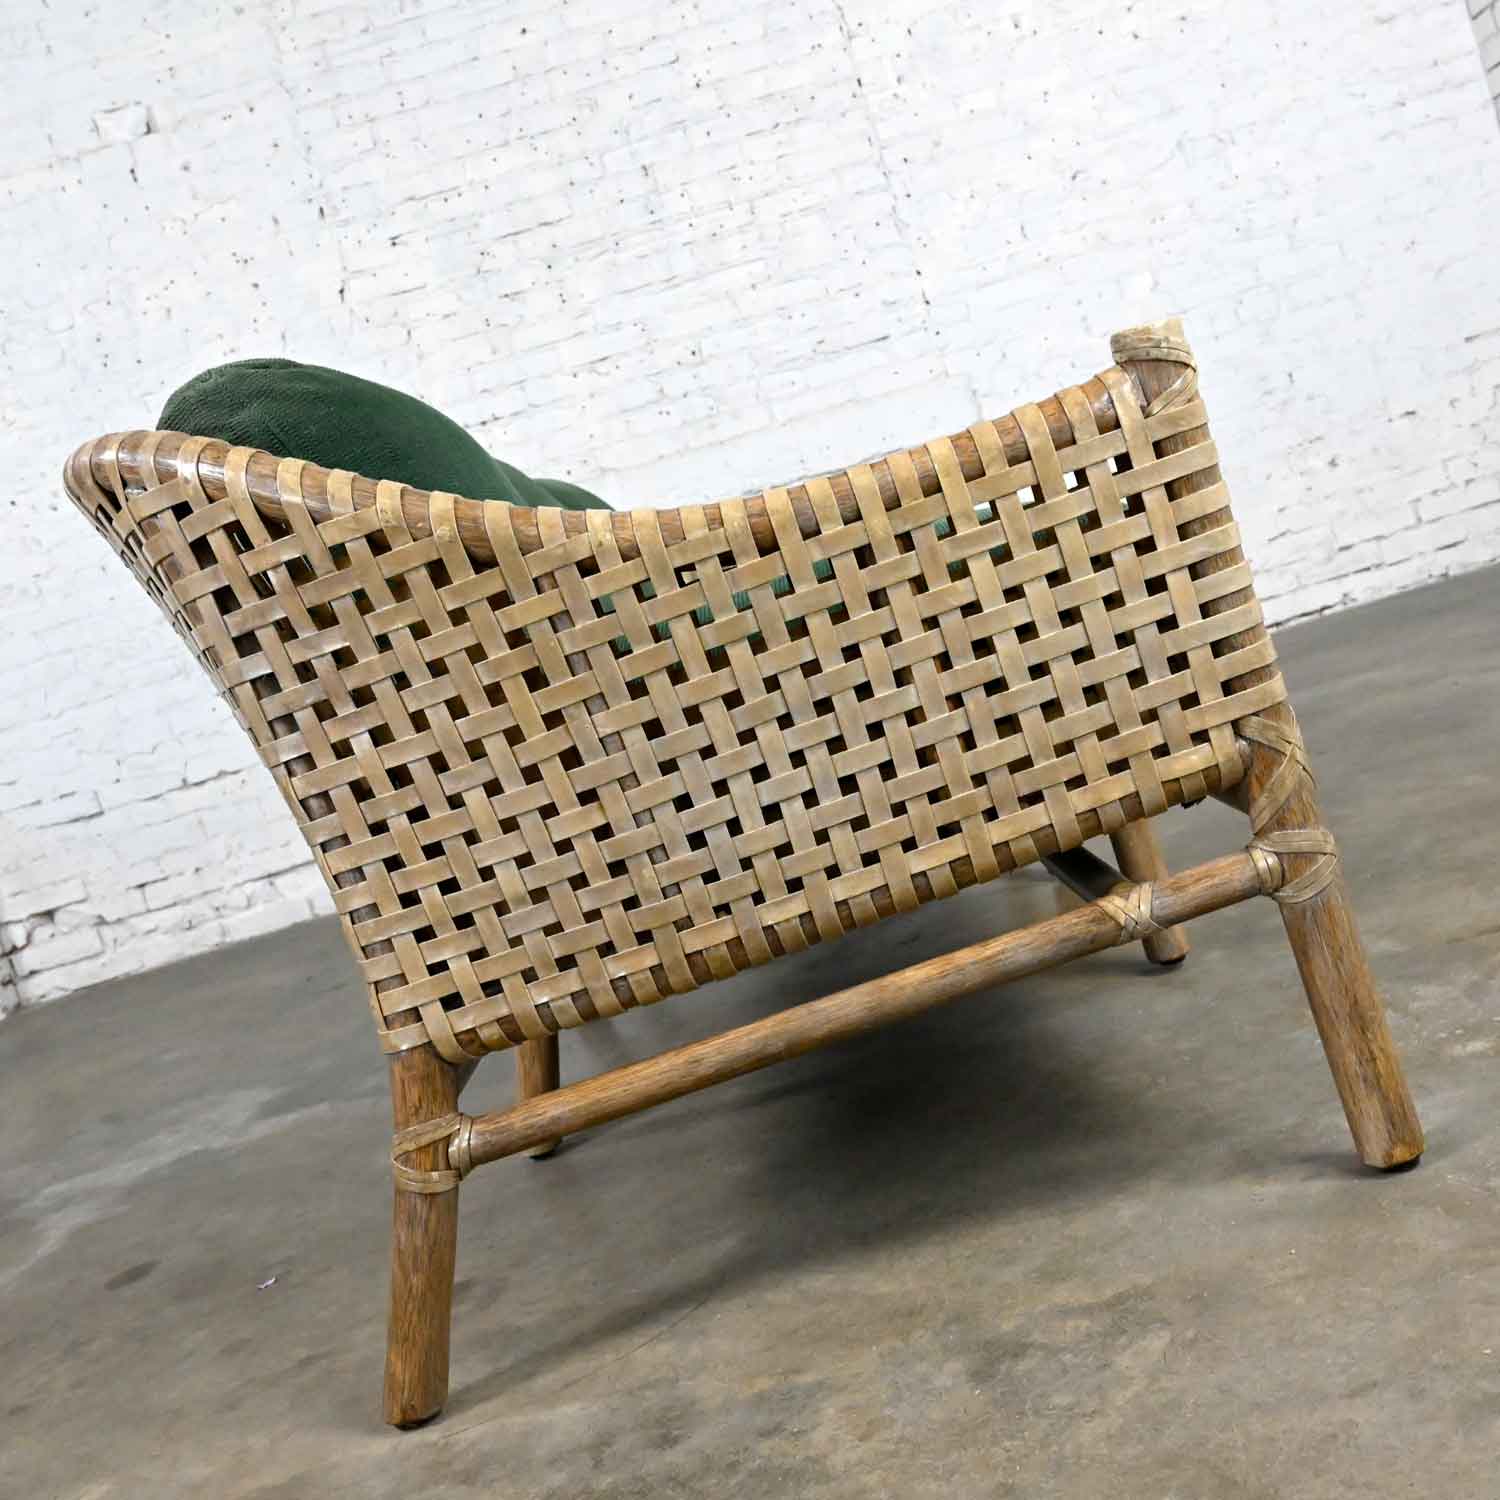 Vintage Organic Modern Rattan & Laced Rawhide Green Chenille Cushion Sofa Settee by McGuire